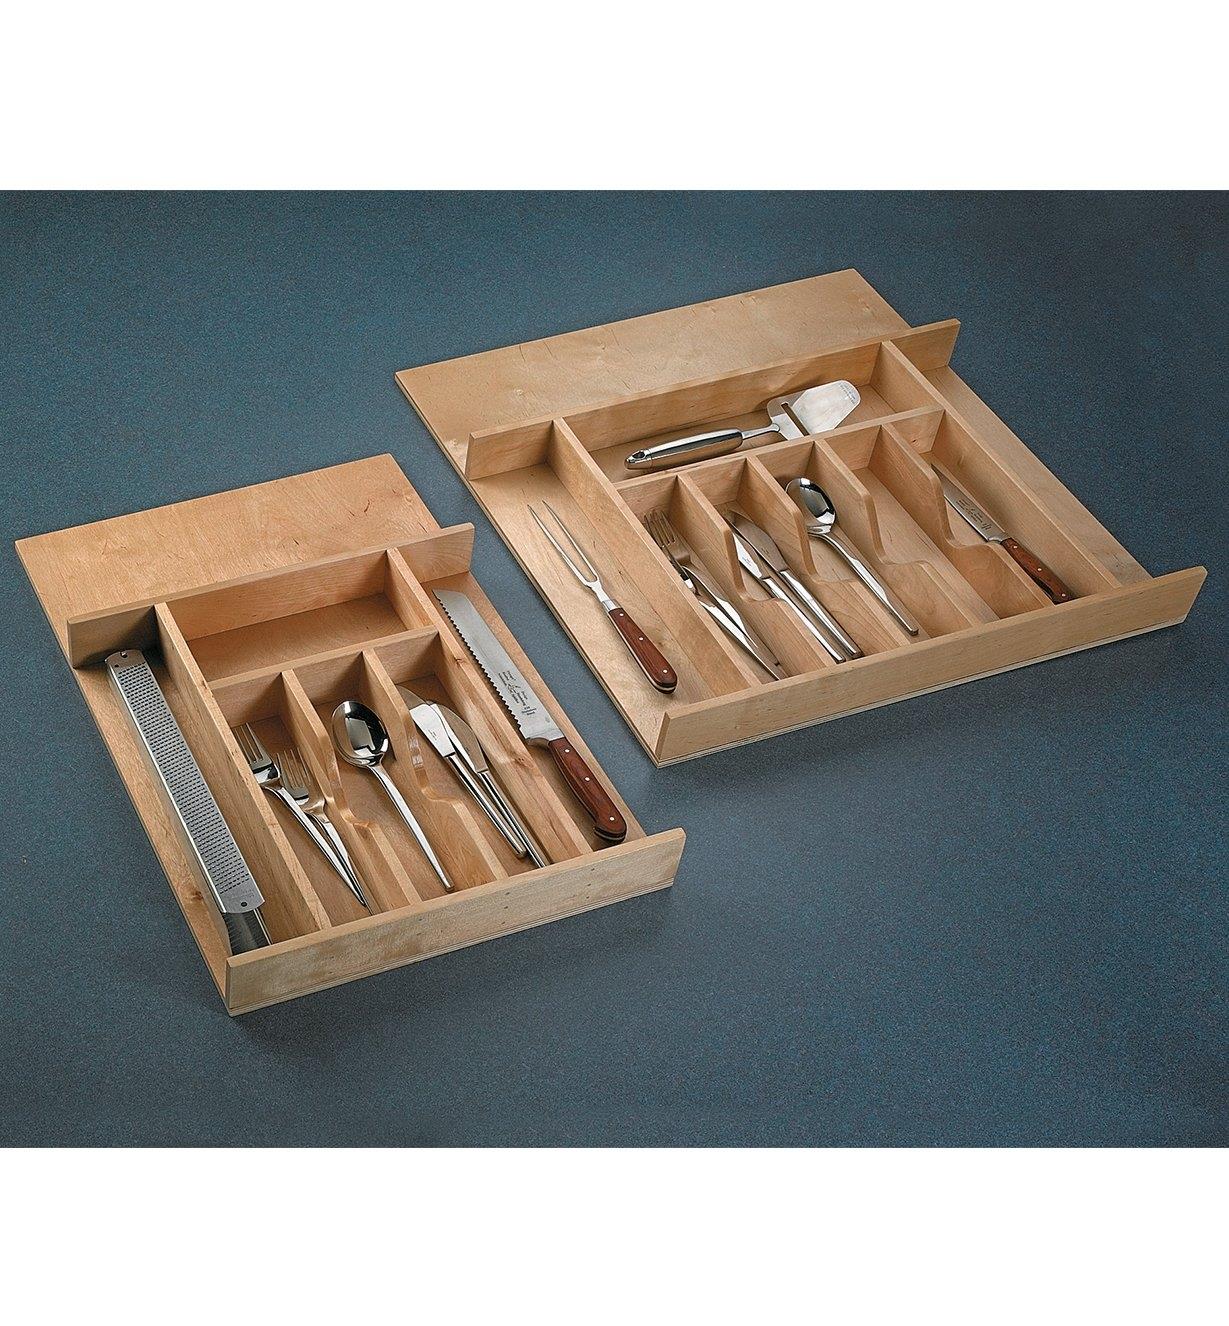 Wooden Cutlery Trays filled with utensils